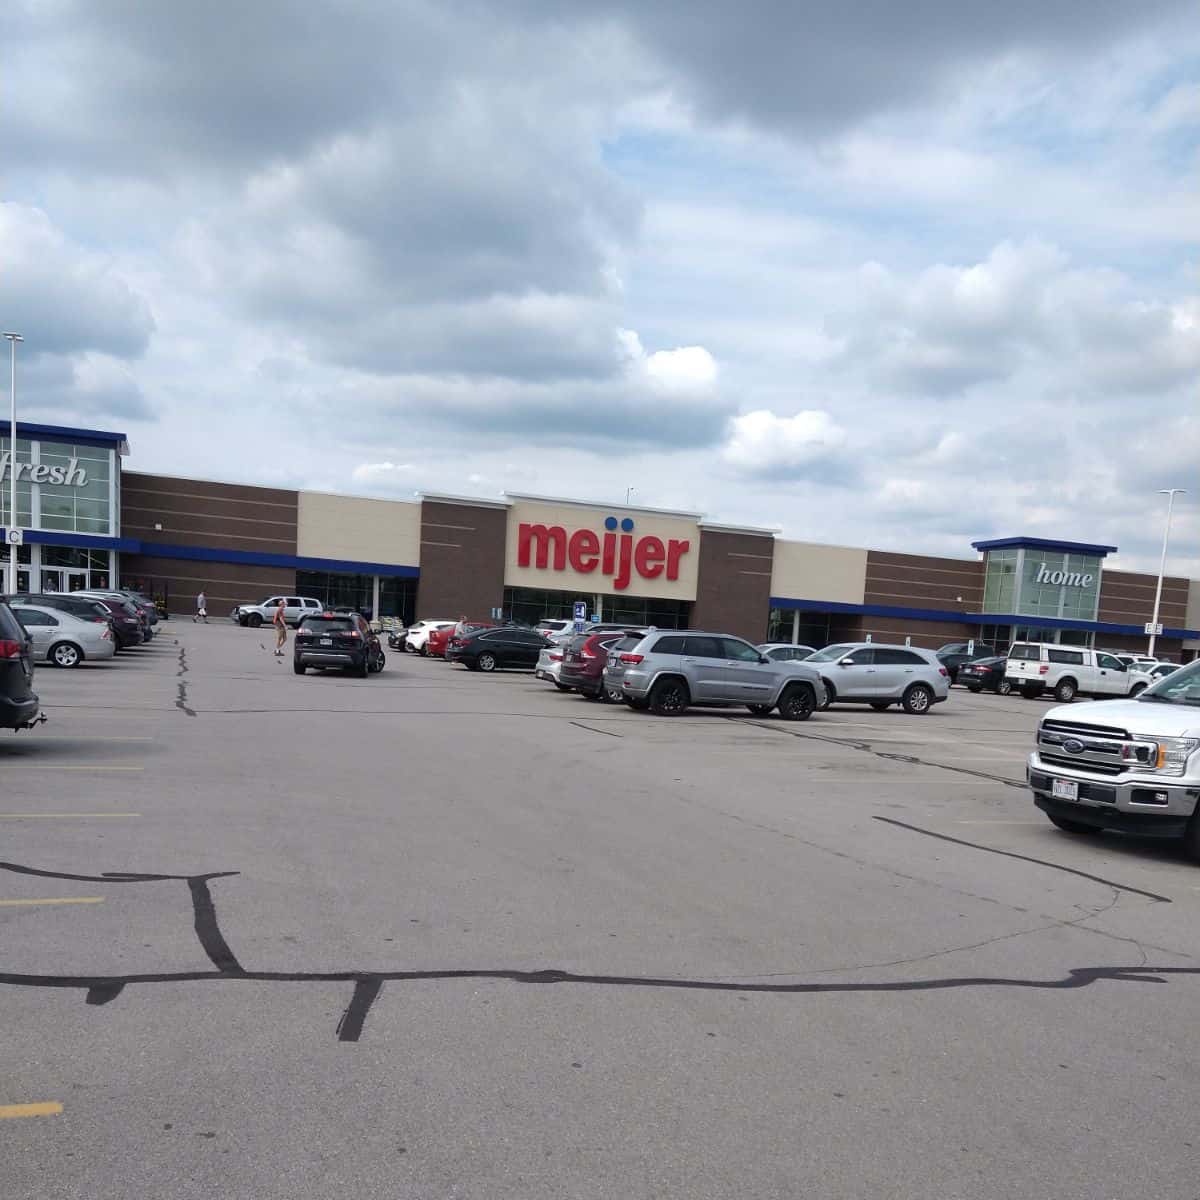 The store front of a Meijer store in Michigan.